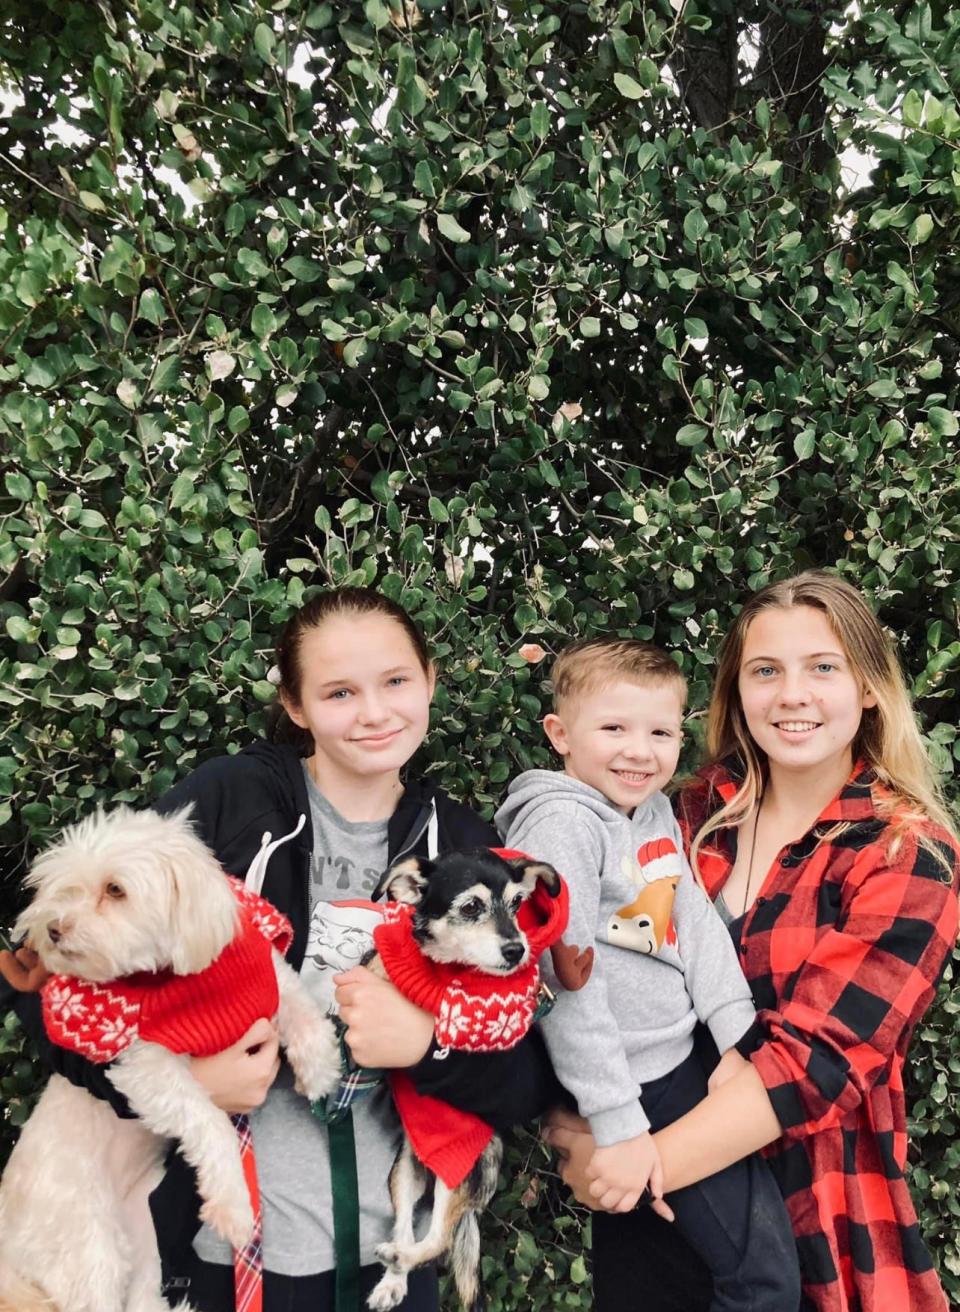 The Schmidt children, Ava, 15, Andrew “Carl," 6, and Alexis, 19, of Camarillo have moved with their parents and grandfather twice in the last year. Mom Heather Schmidt says they can afford to rent but rising costs are keeping the family from buying.